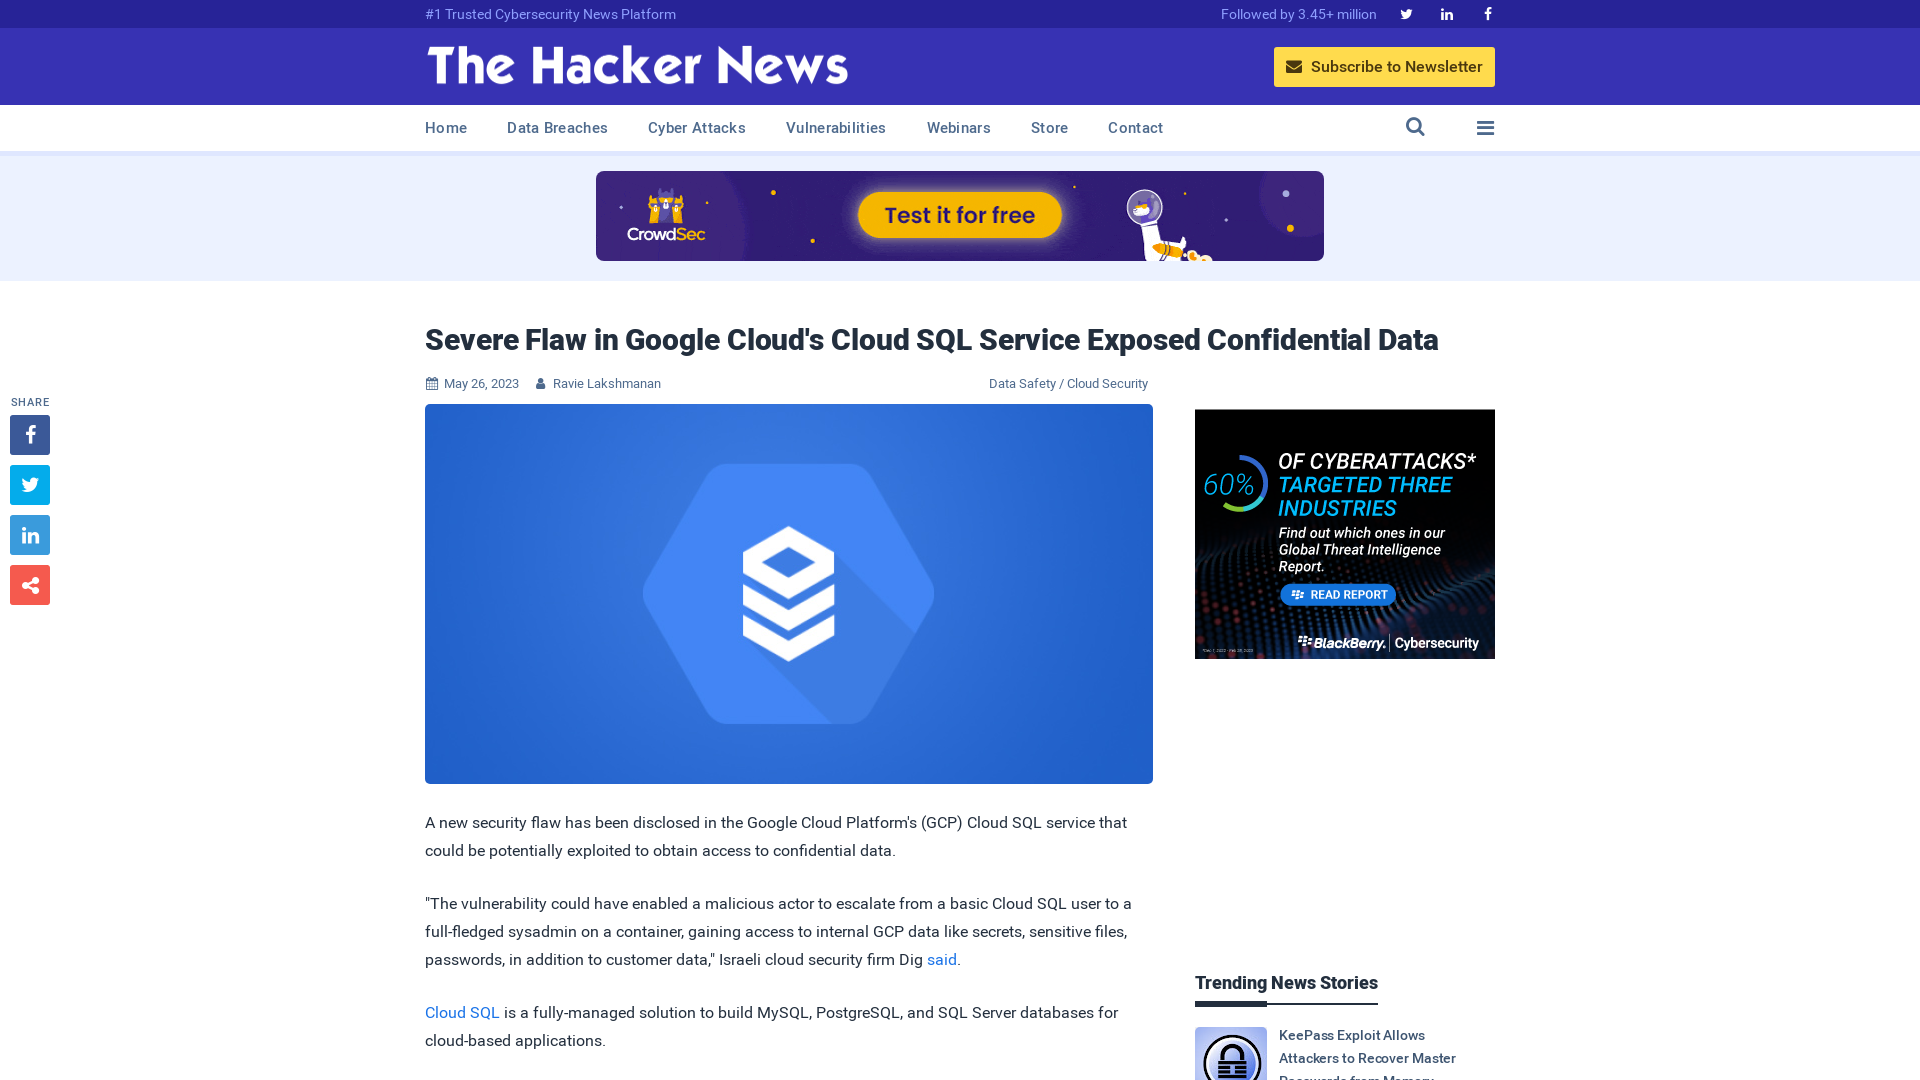 Severe Flaw in Google Cloud's Cloud SQL Service Exposed Confidential Data